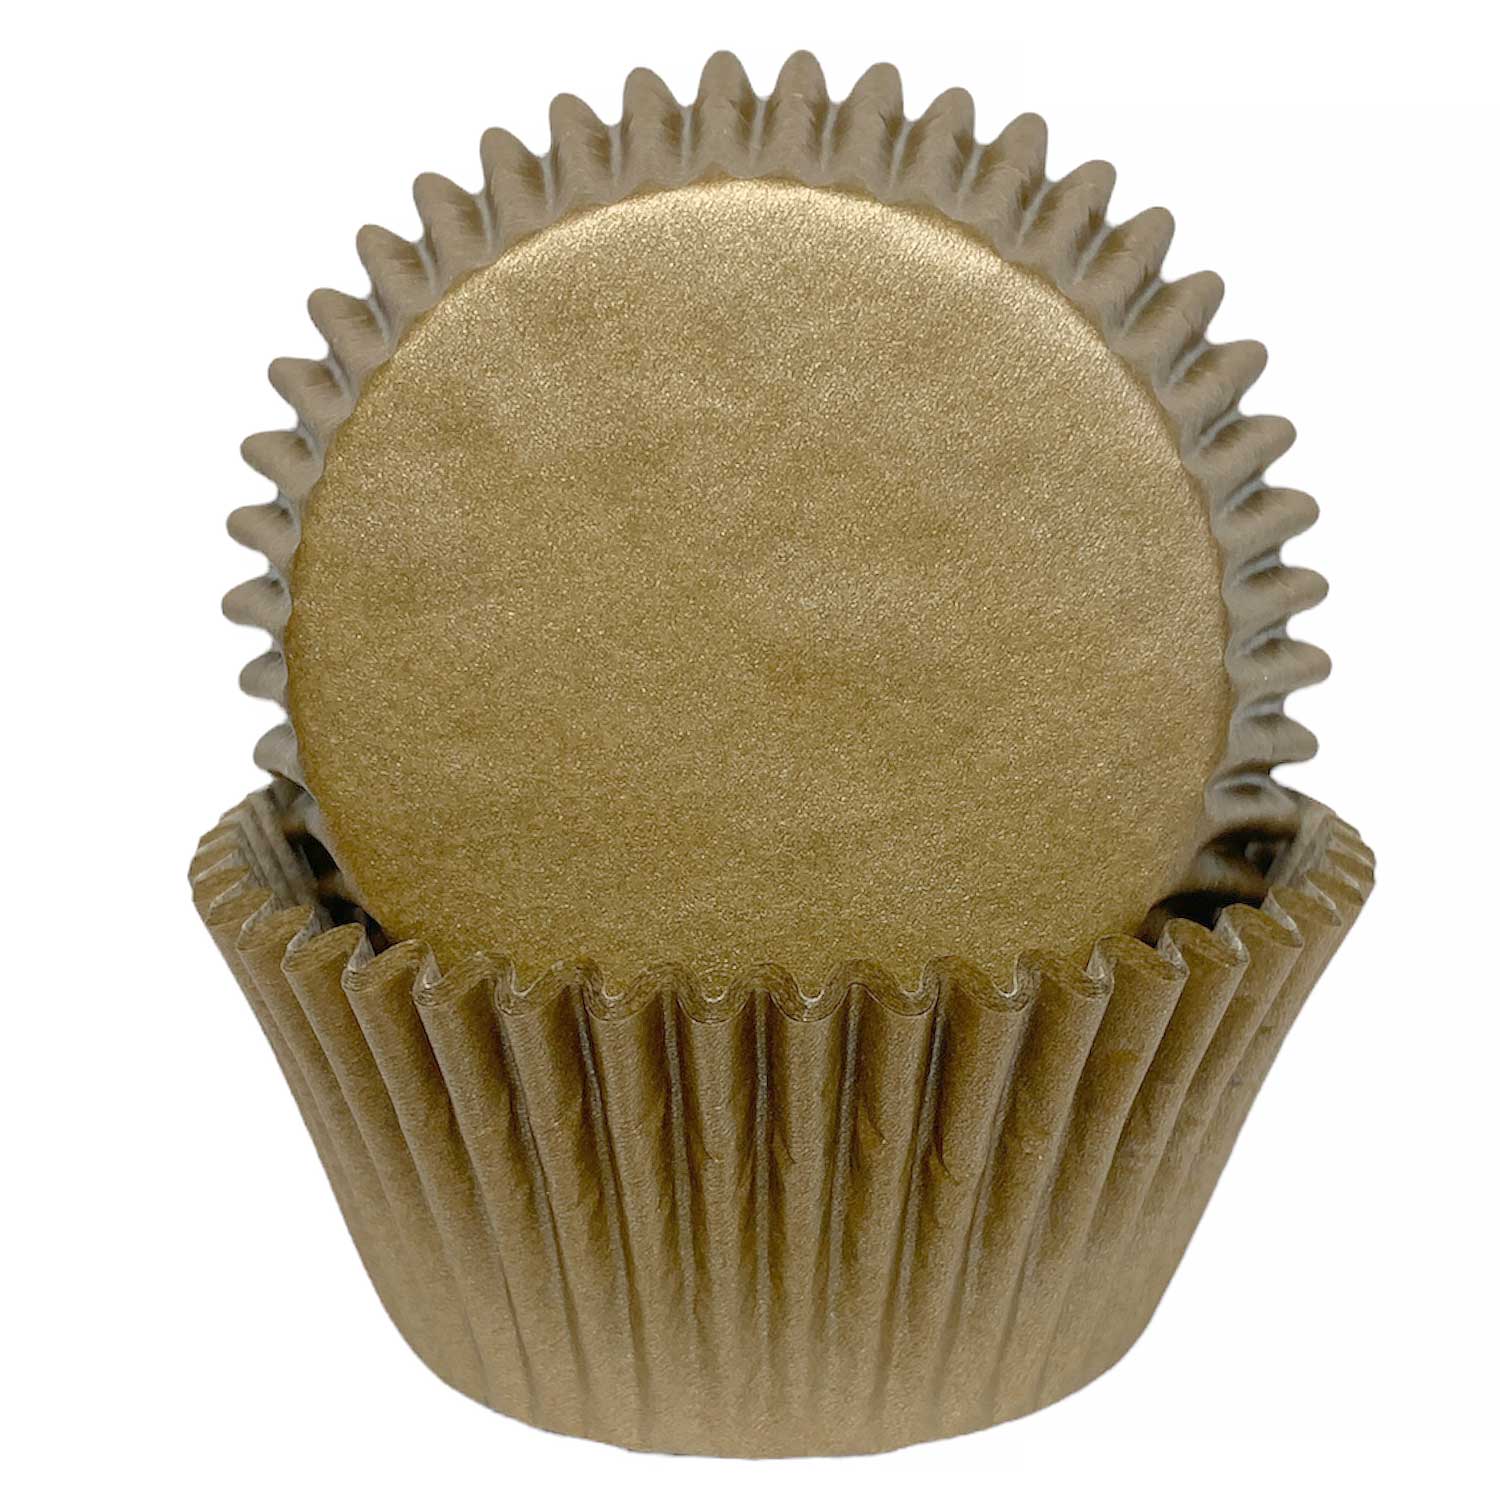 Solid Gold Standard Cupcake Liners